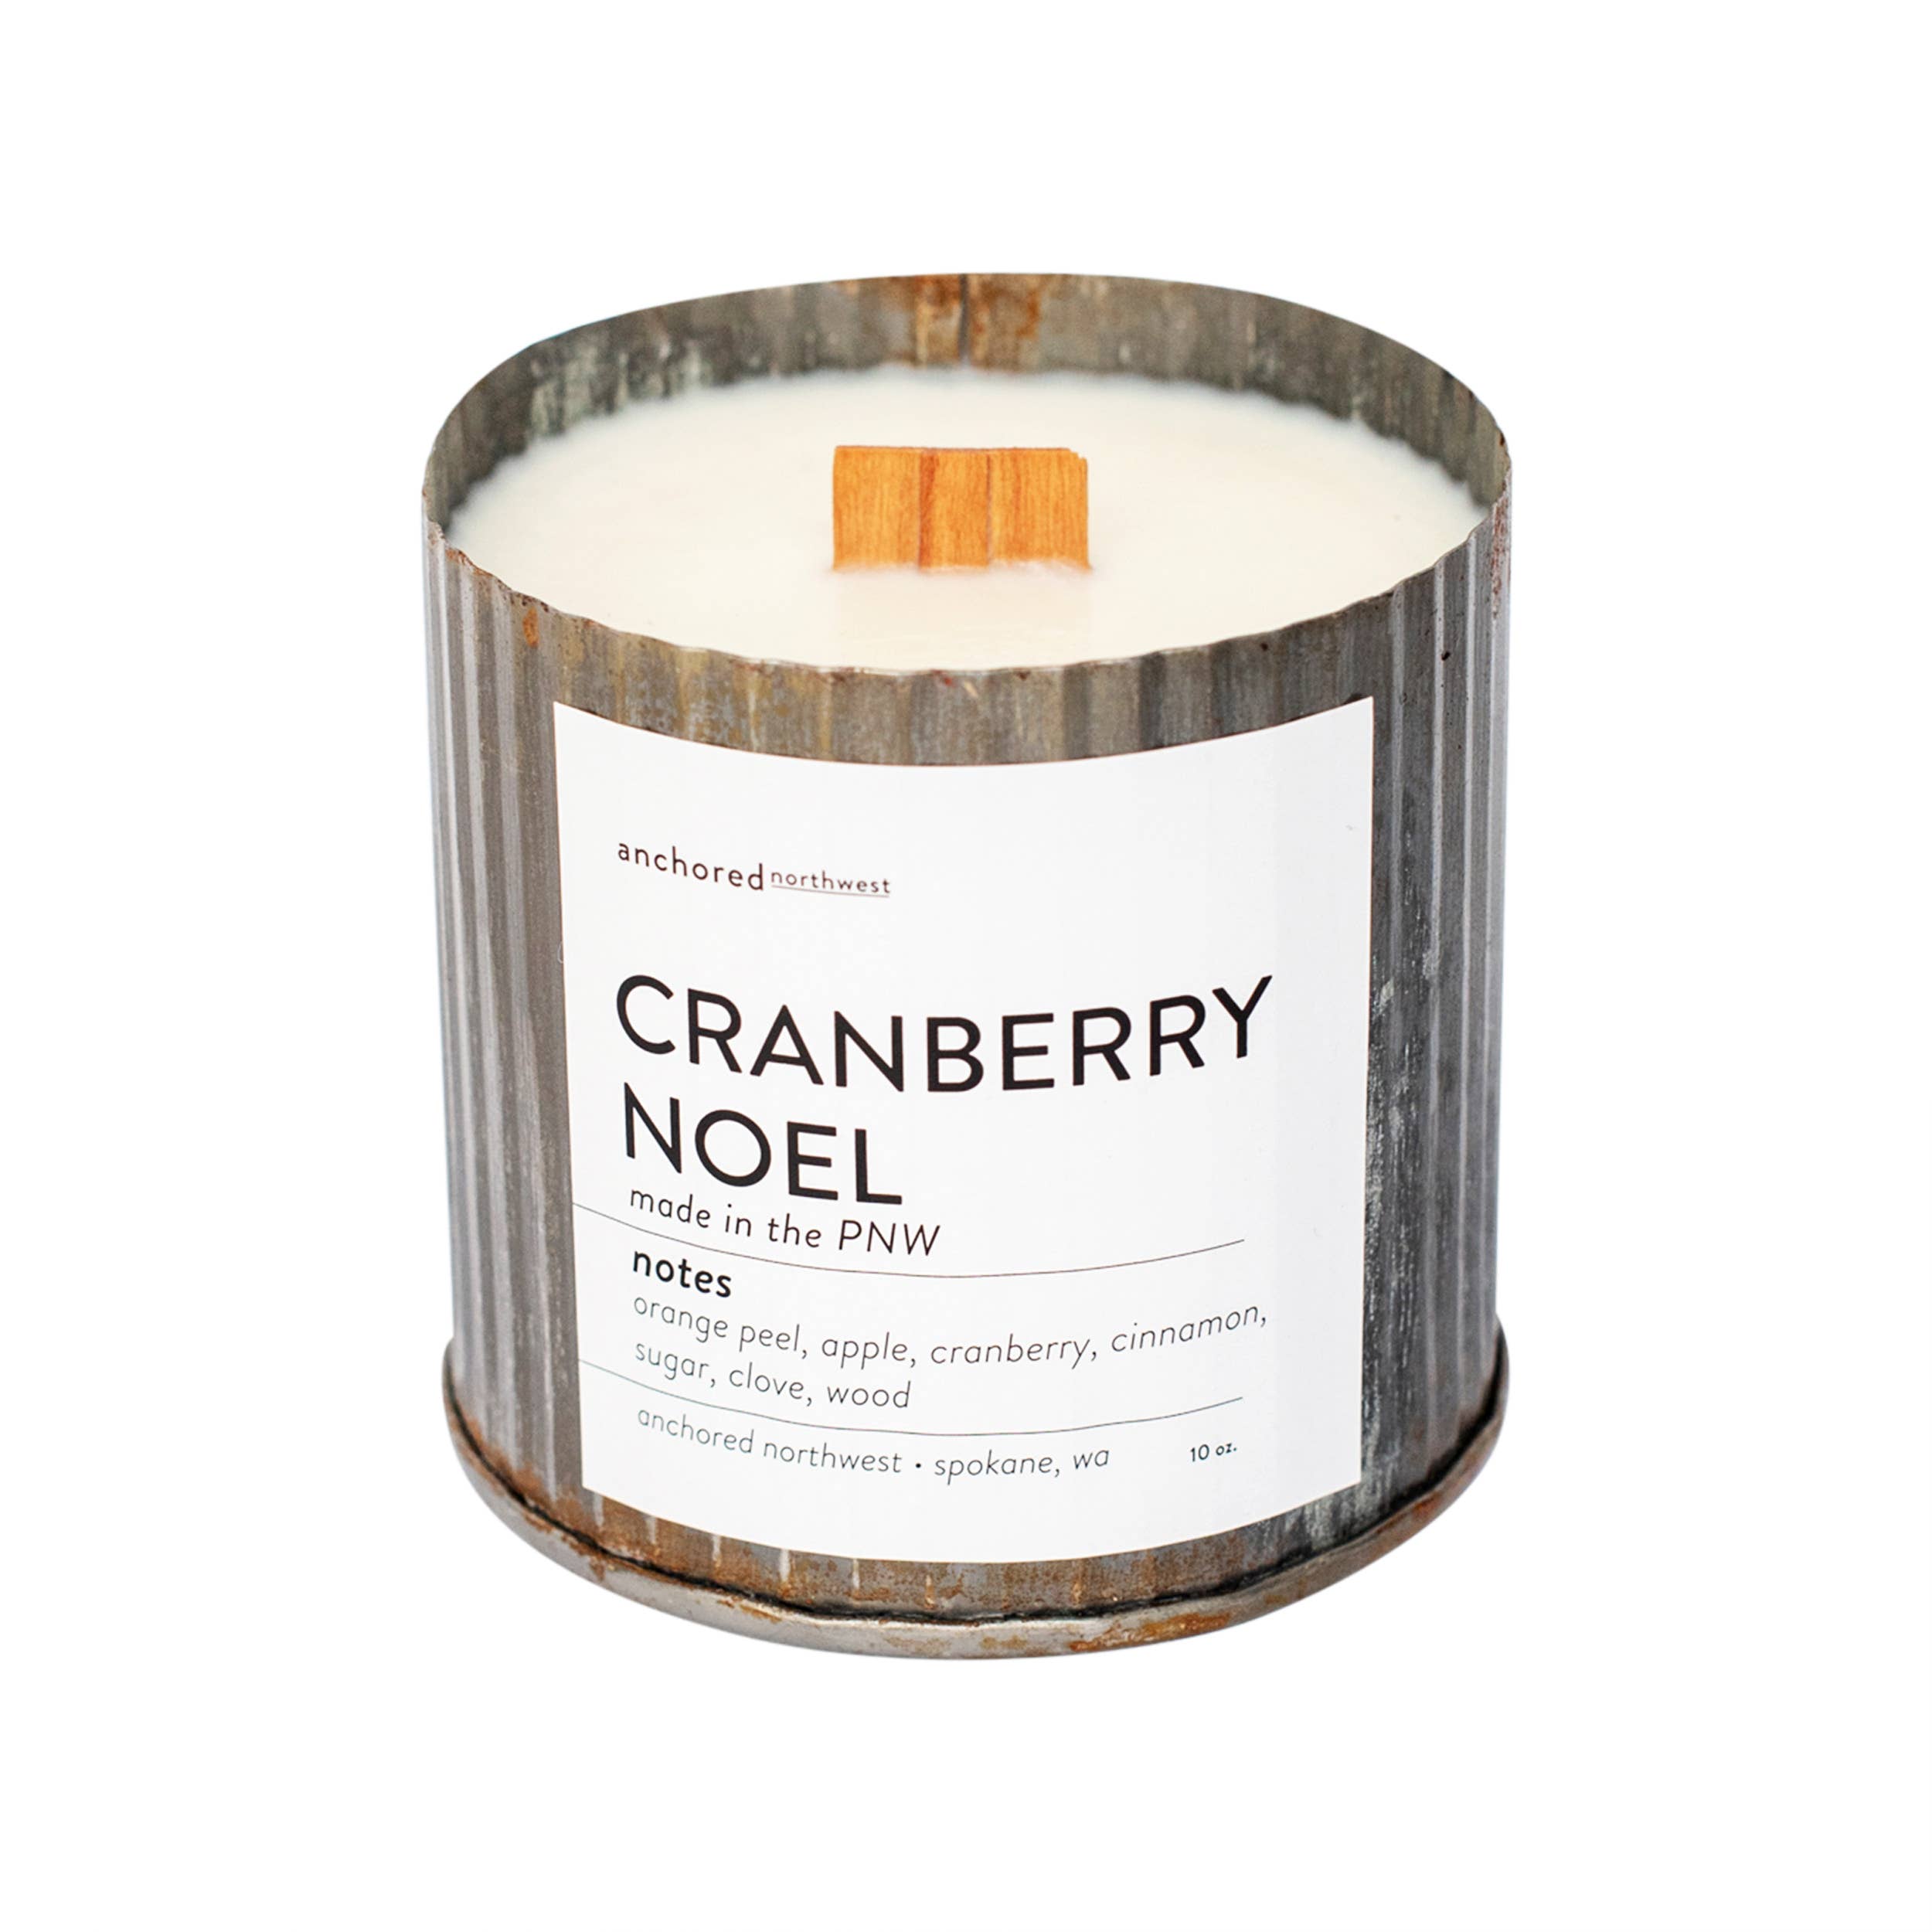 Cranberry Noel Wood Wick Rustic Farmhouse Soy Candle: 10oz